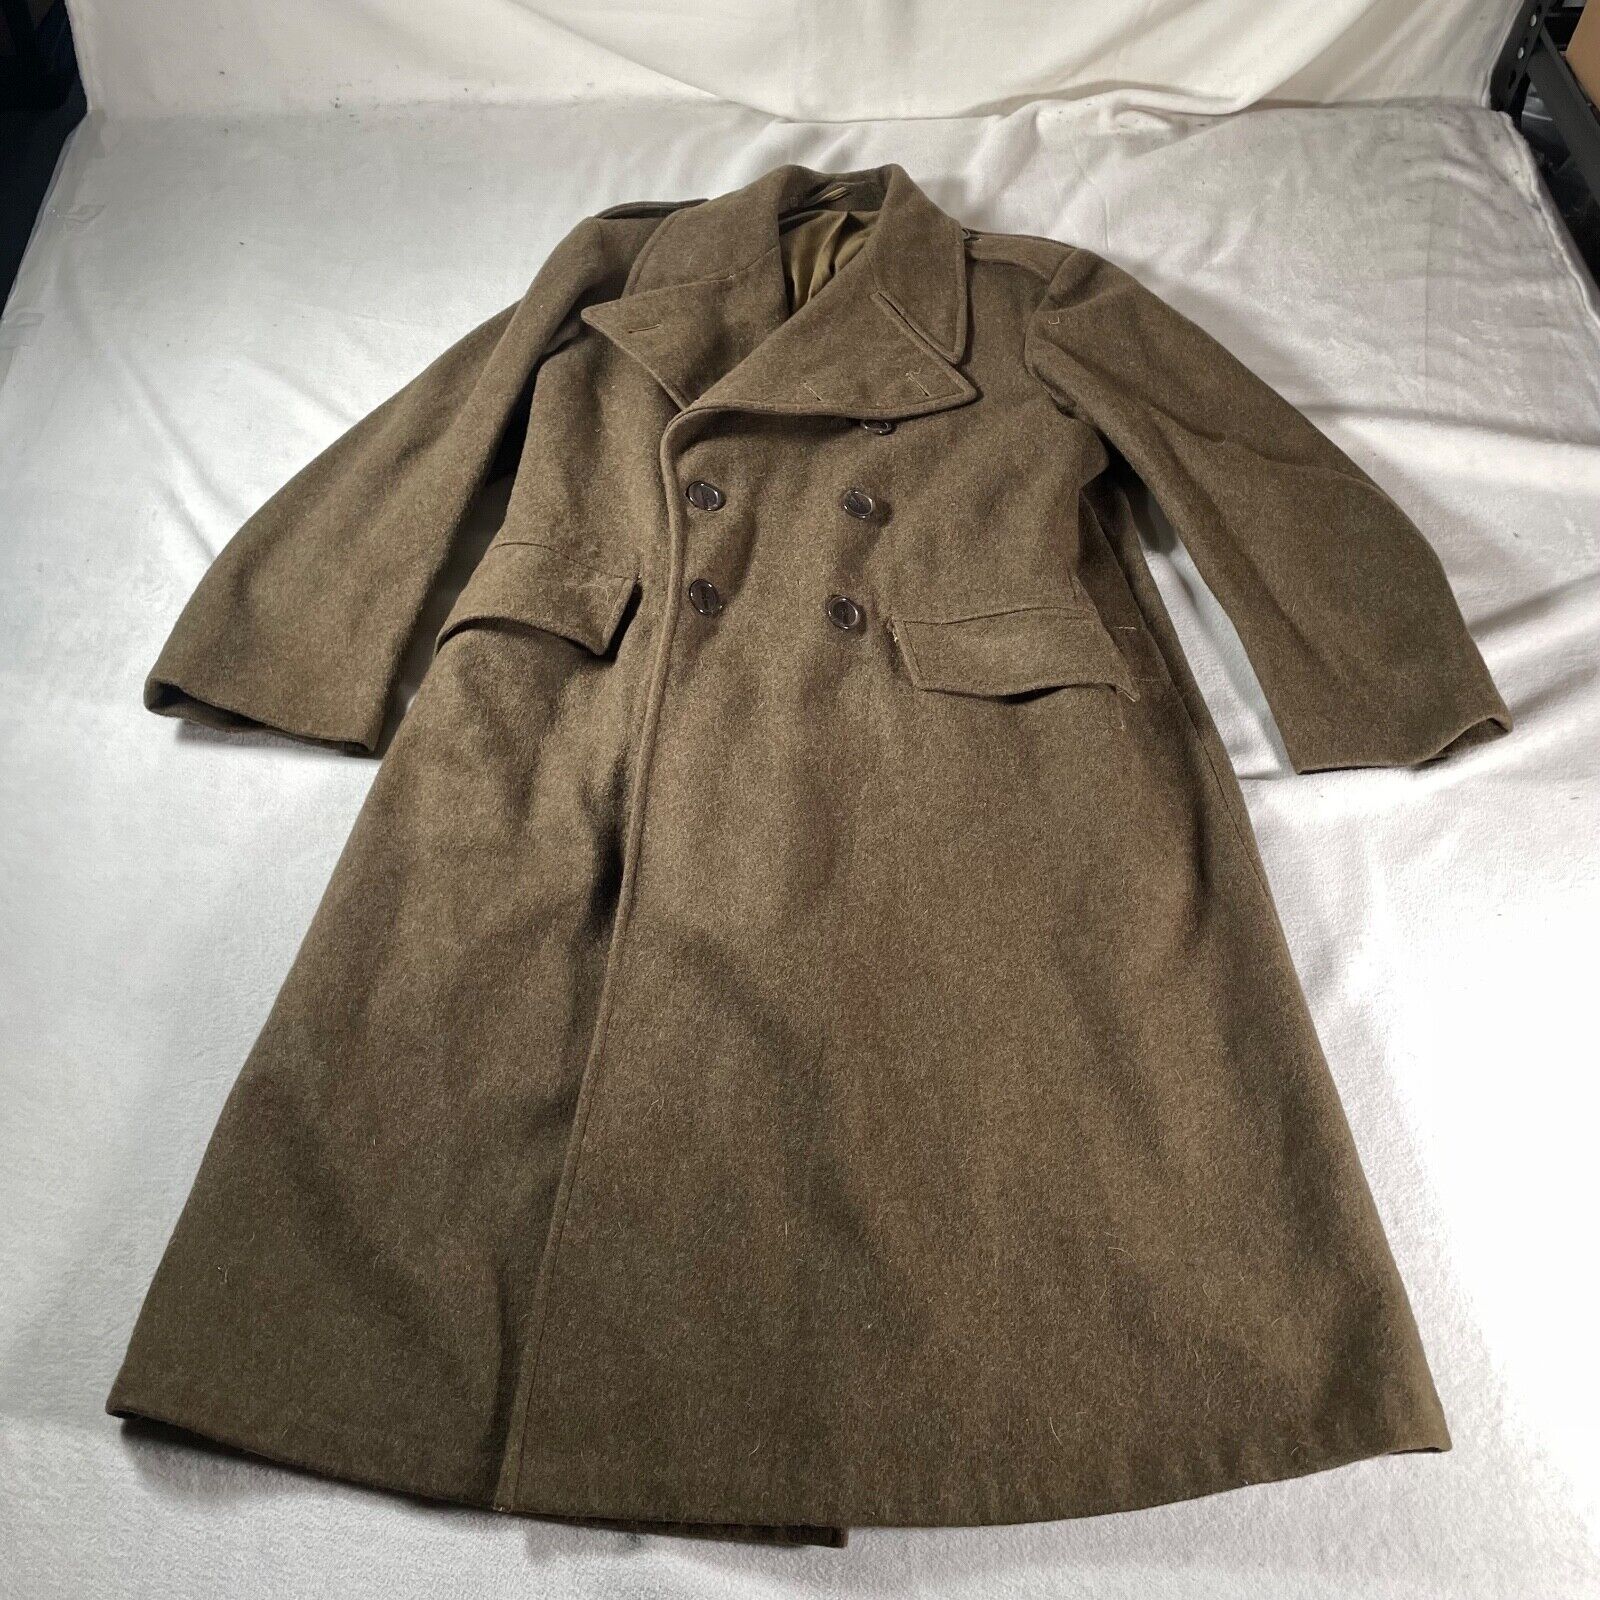 British Army Great Coat Dismounted Size 8 Royal Corps of Signal 1951 Pattern